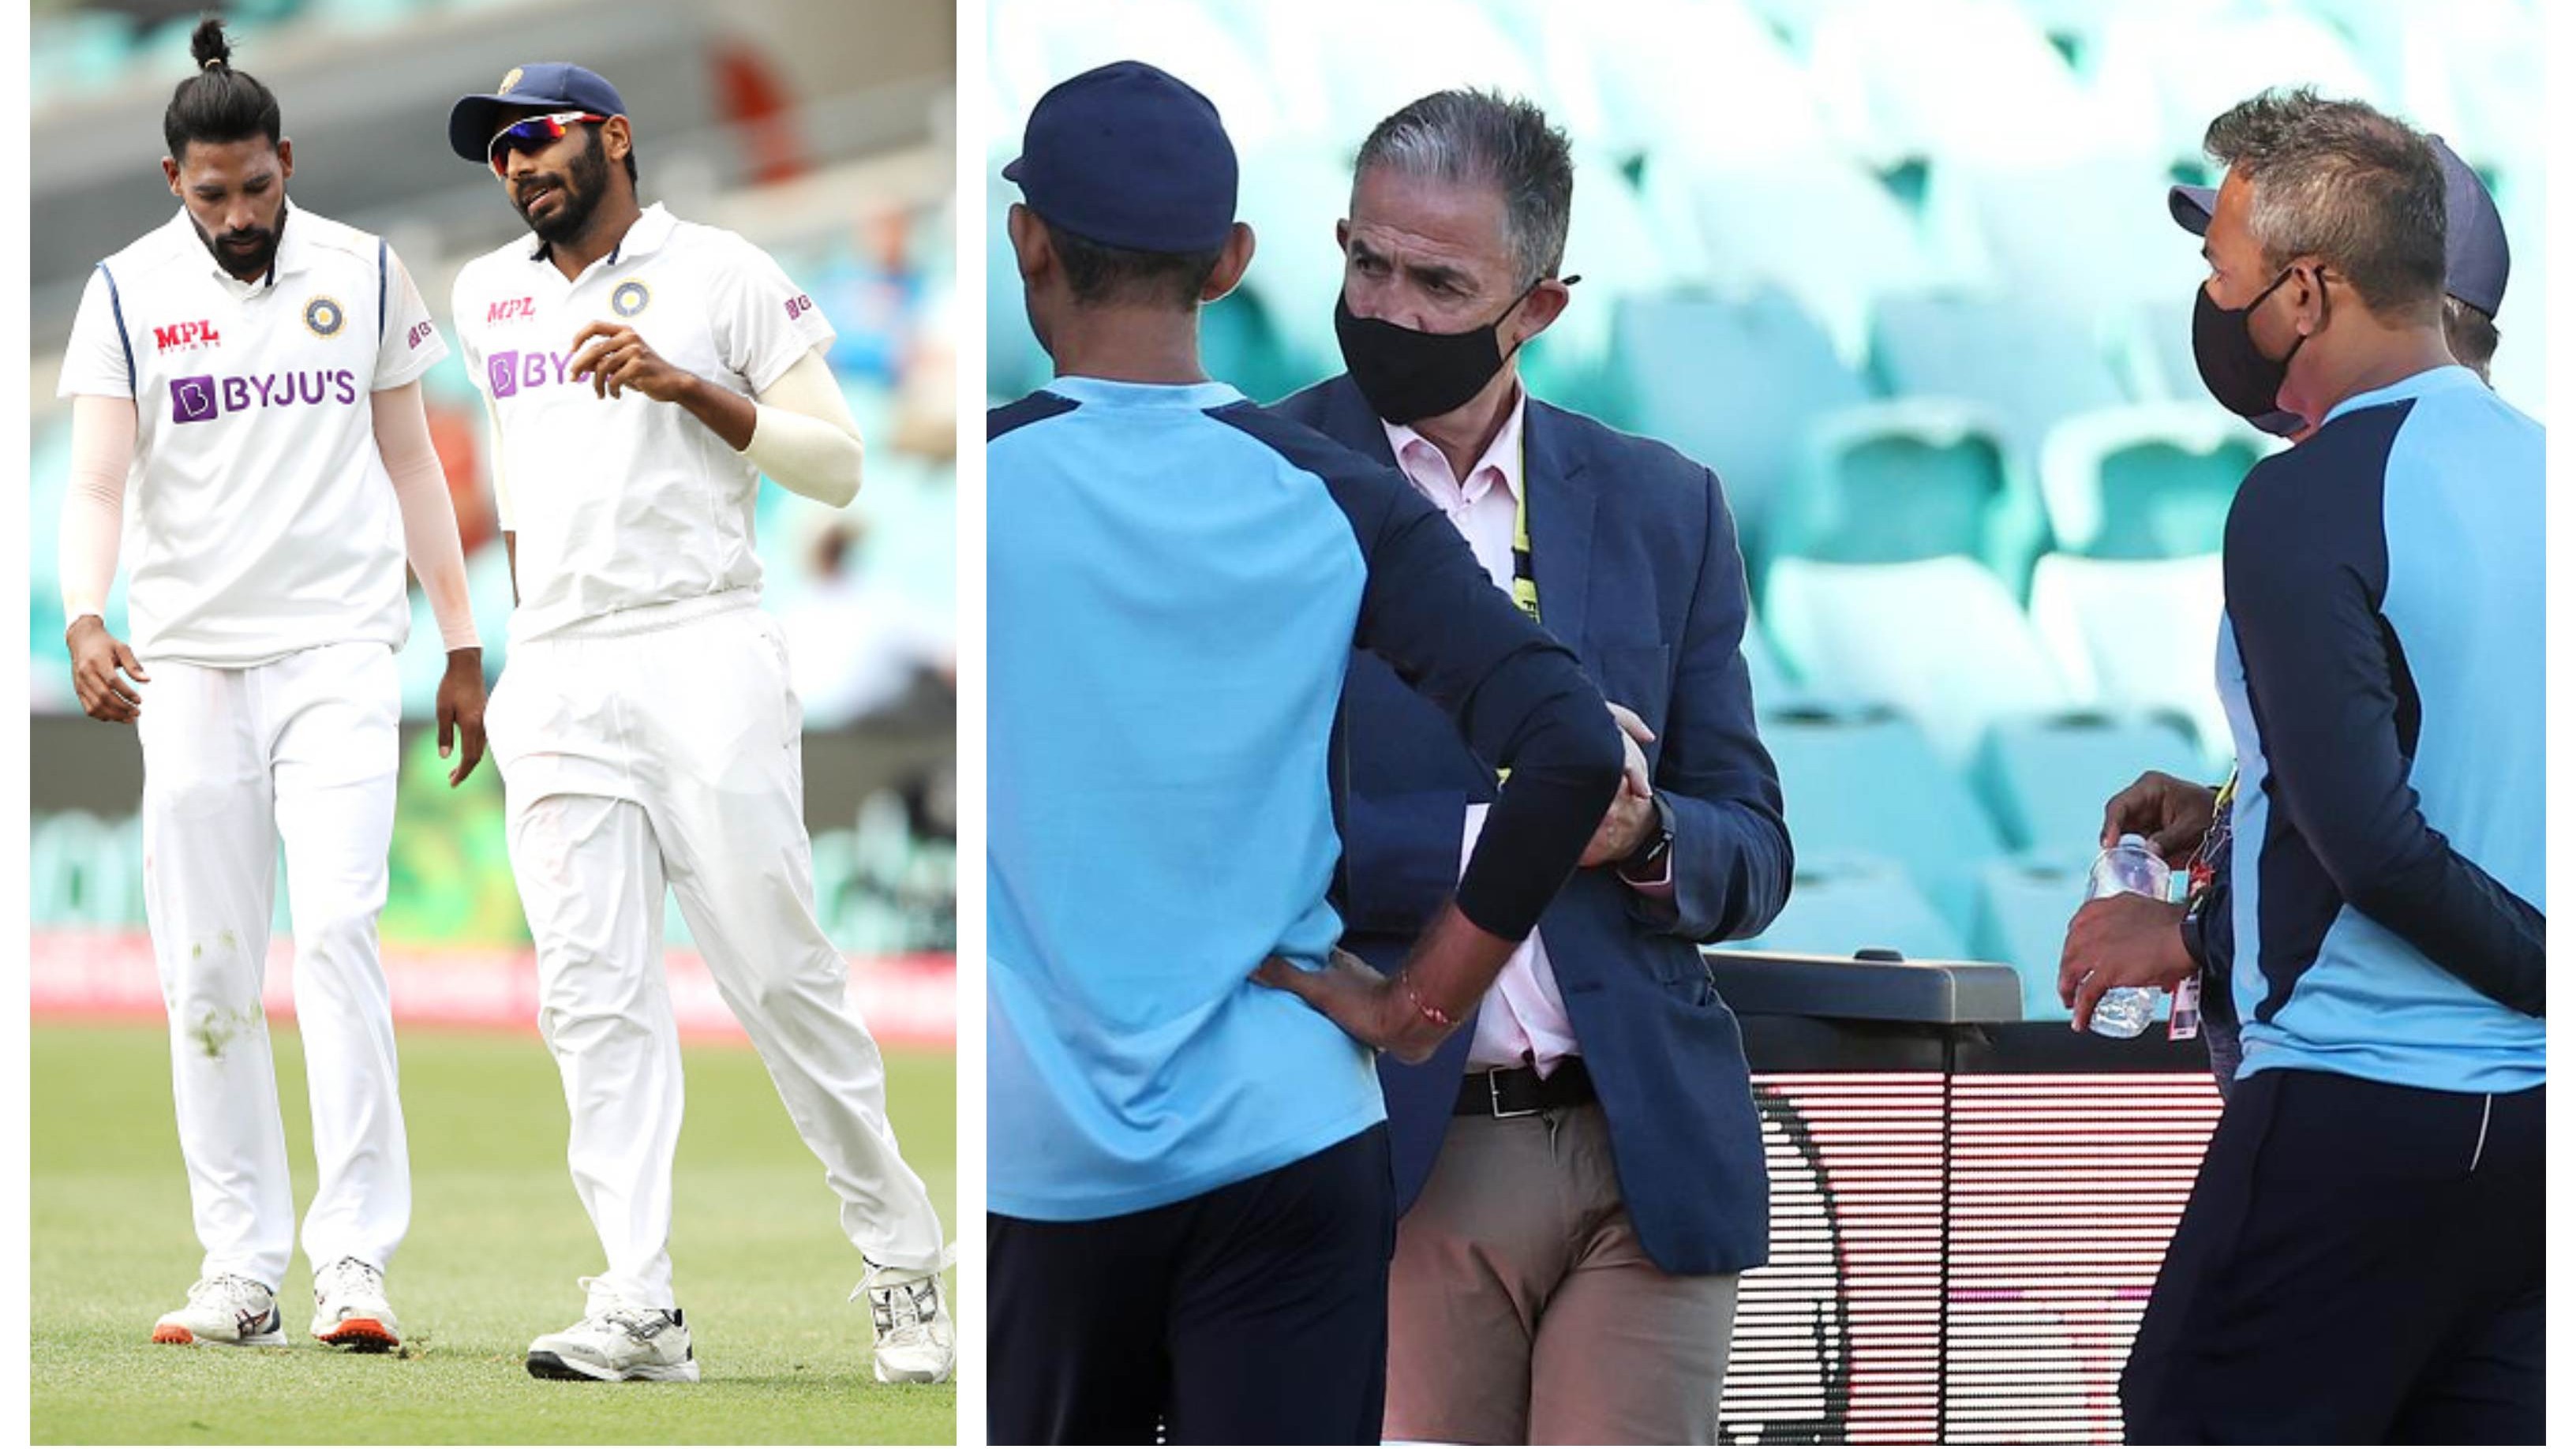 AUS v IND 2020-21: Indian team management files complaint over racial abuse against Bumrah and Siraj at SCG